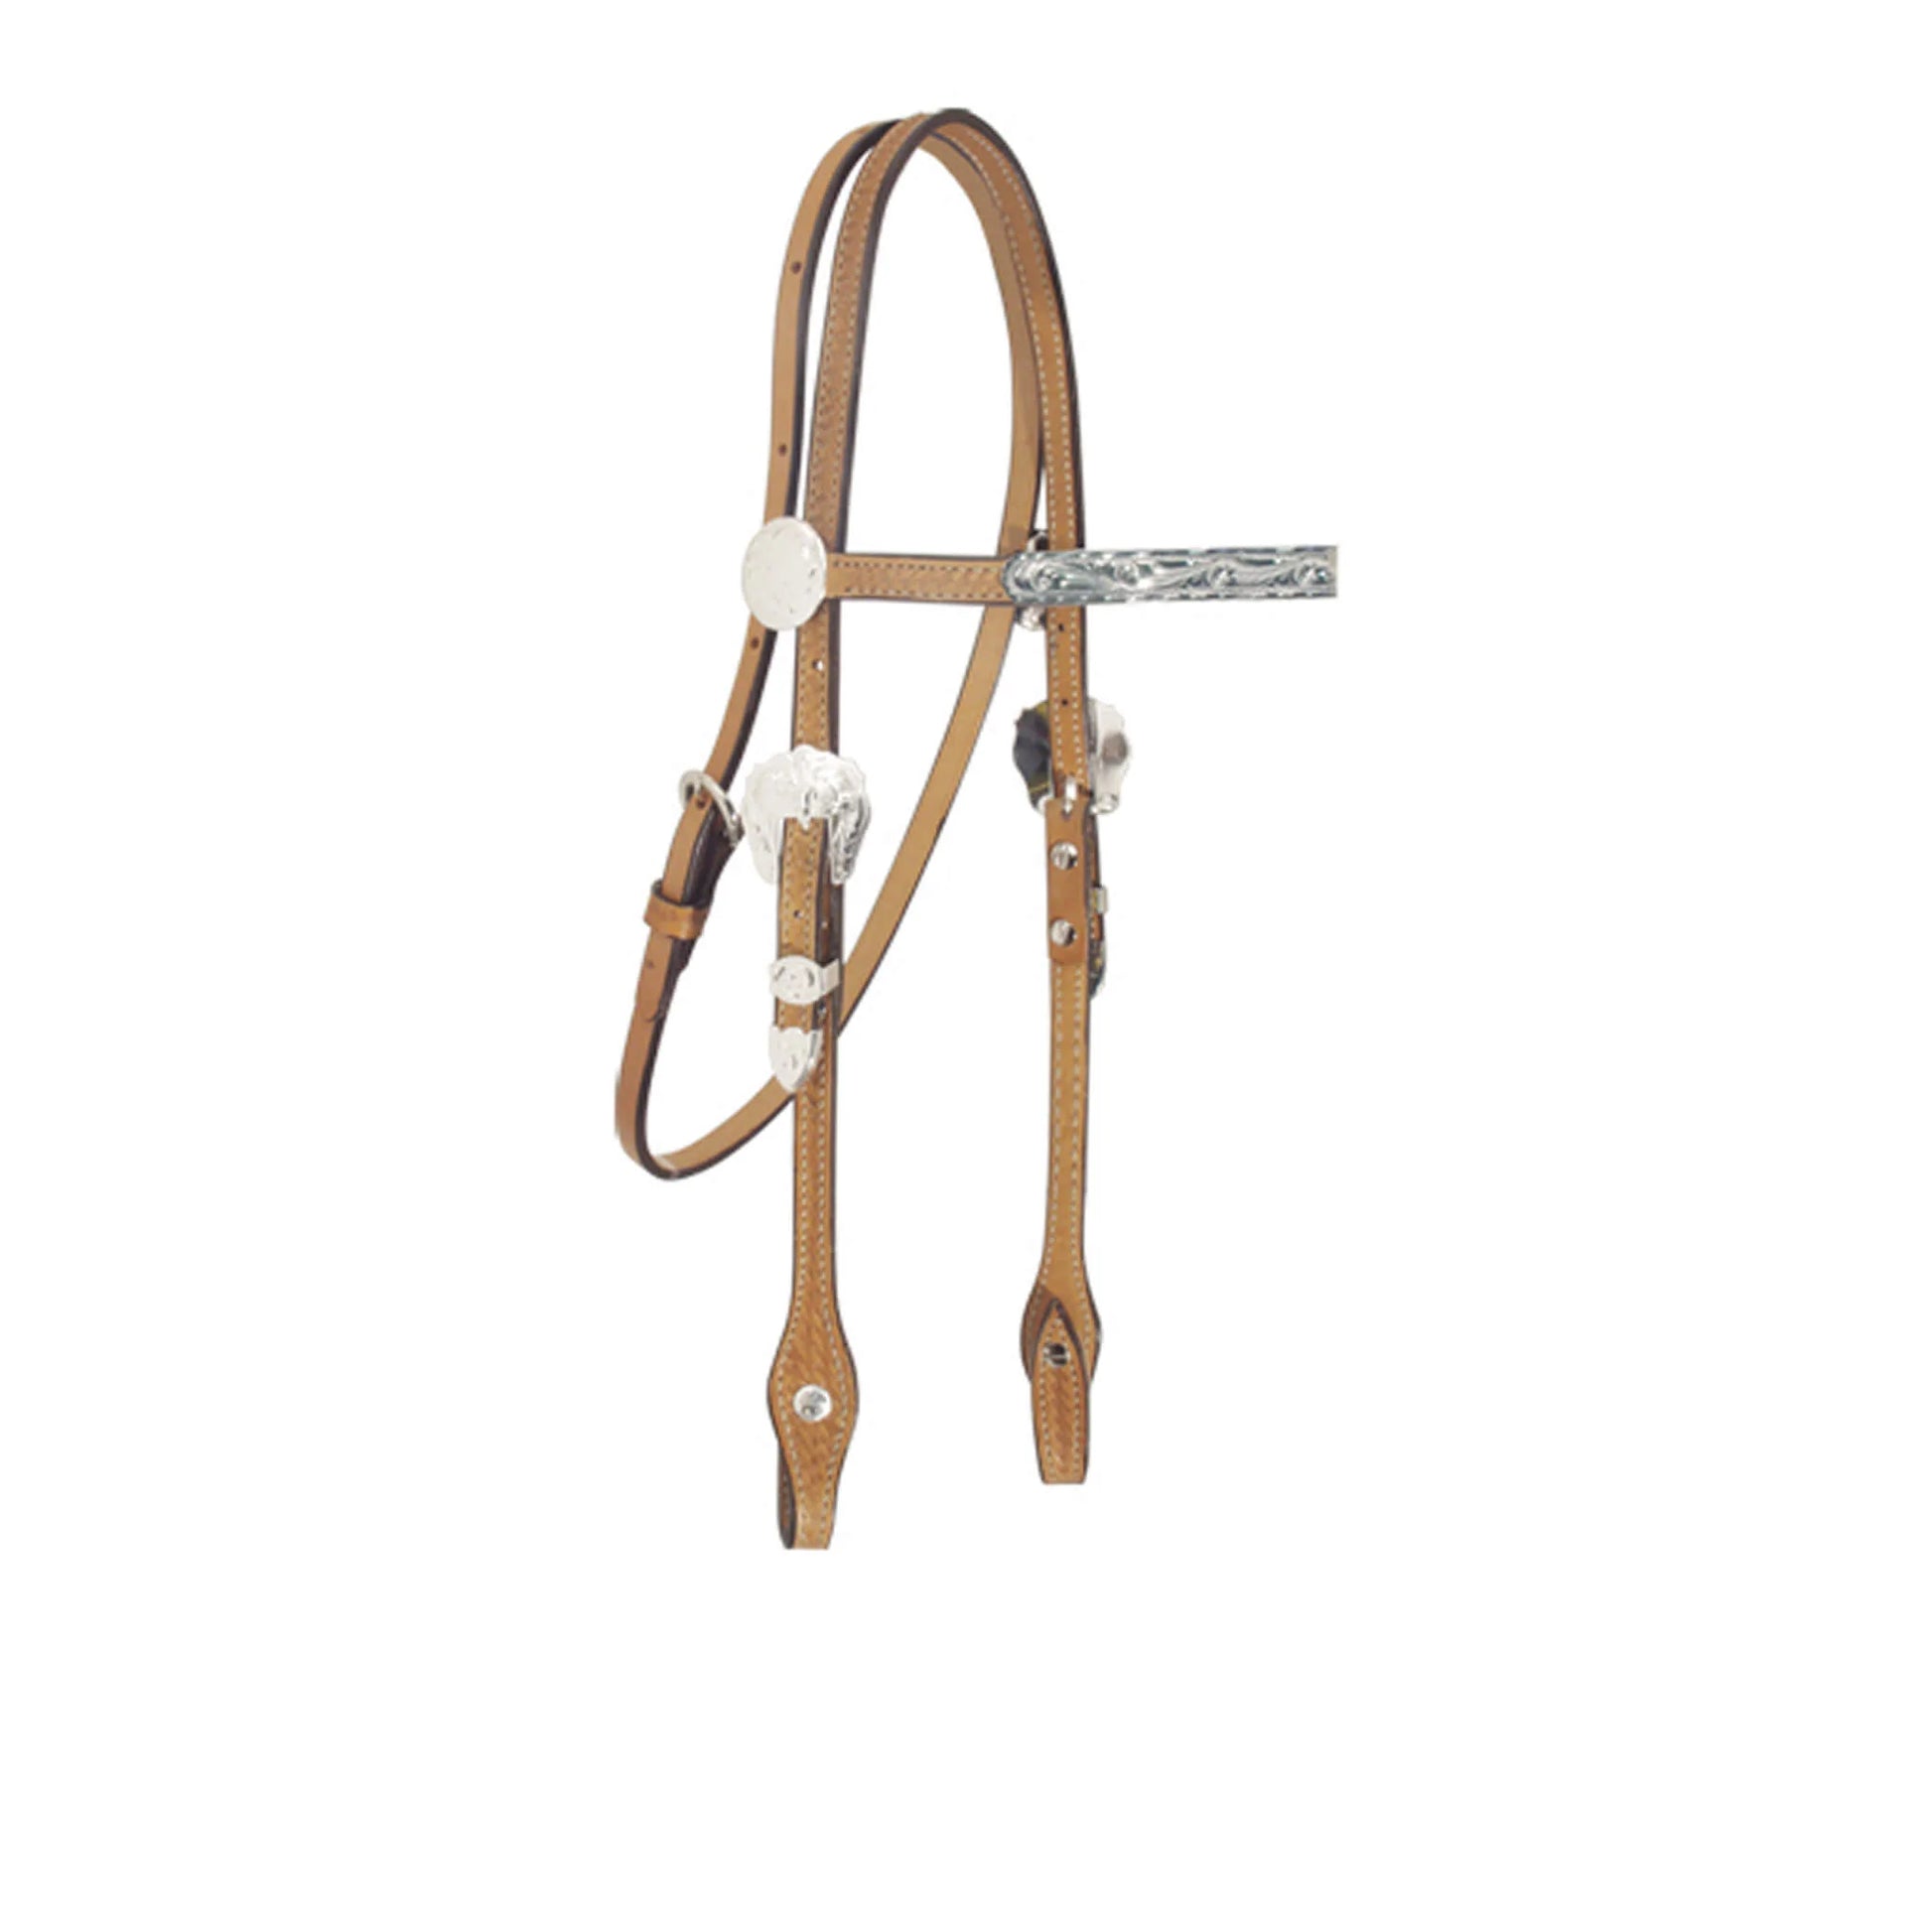 1/2" Straight browband headstall golden leather basket tooled with silver bars and silver hardware.